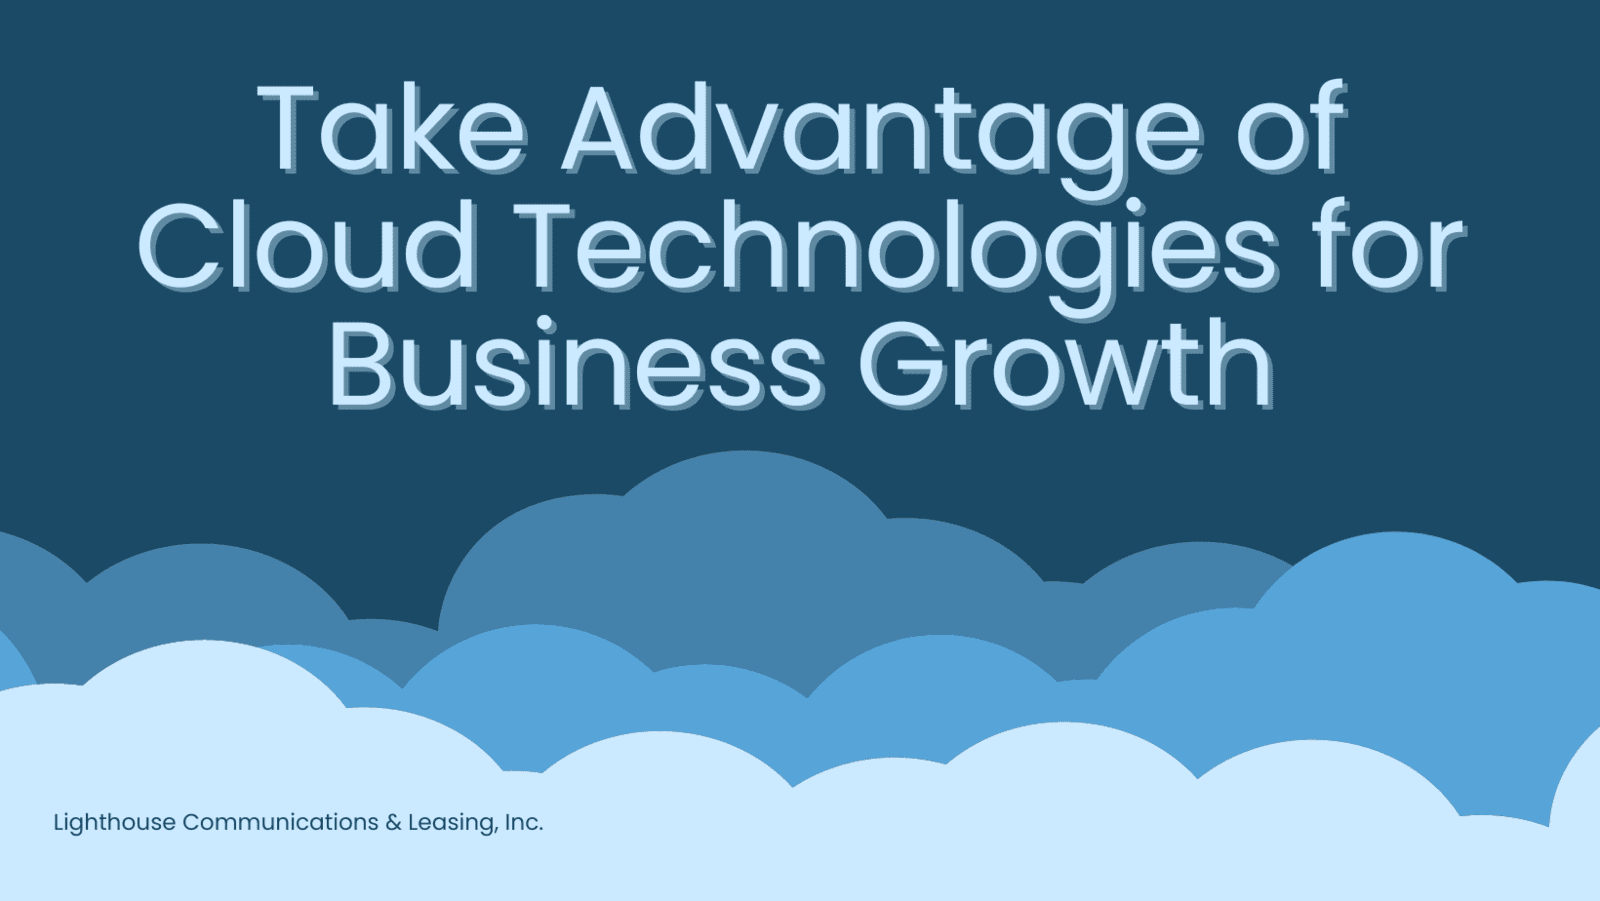 How to Take Advantage of Cloud Technologies for Business Growth